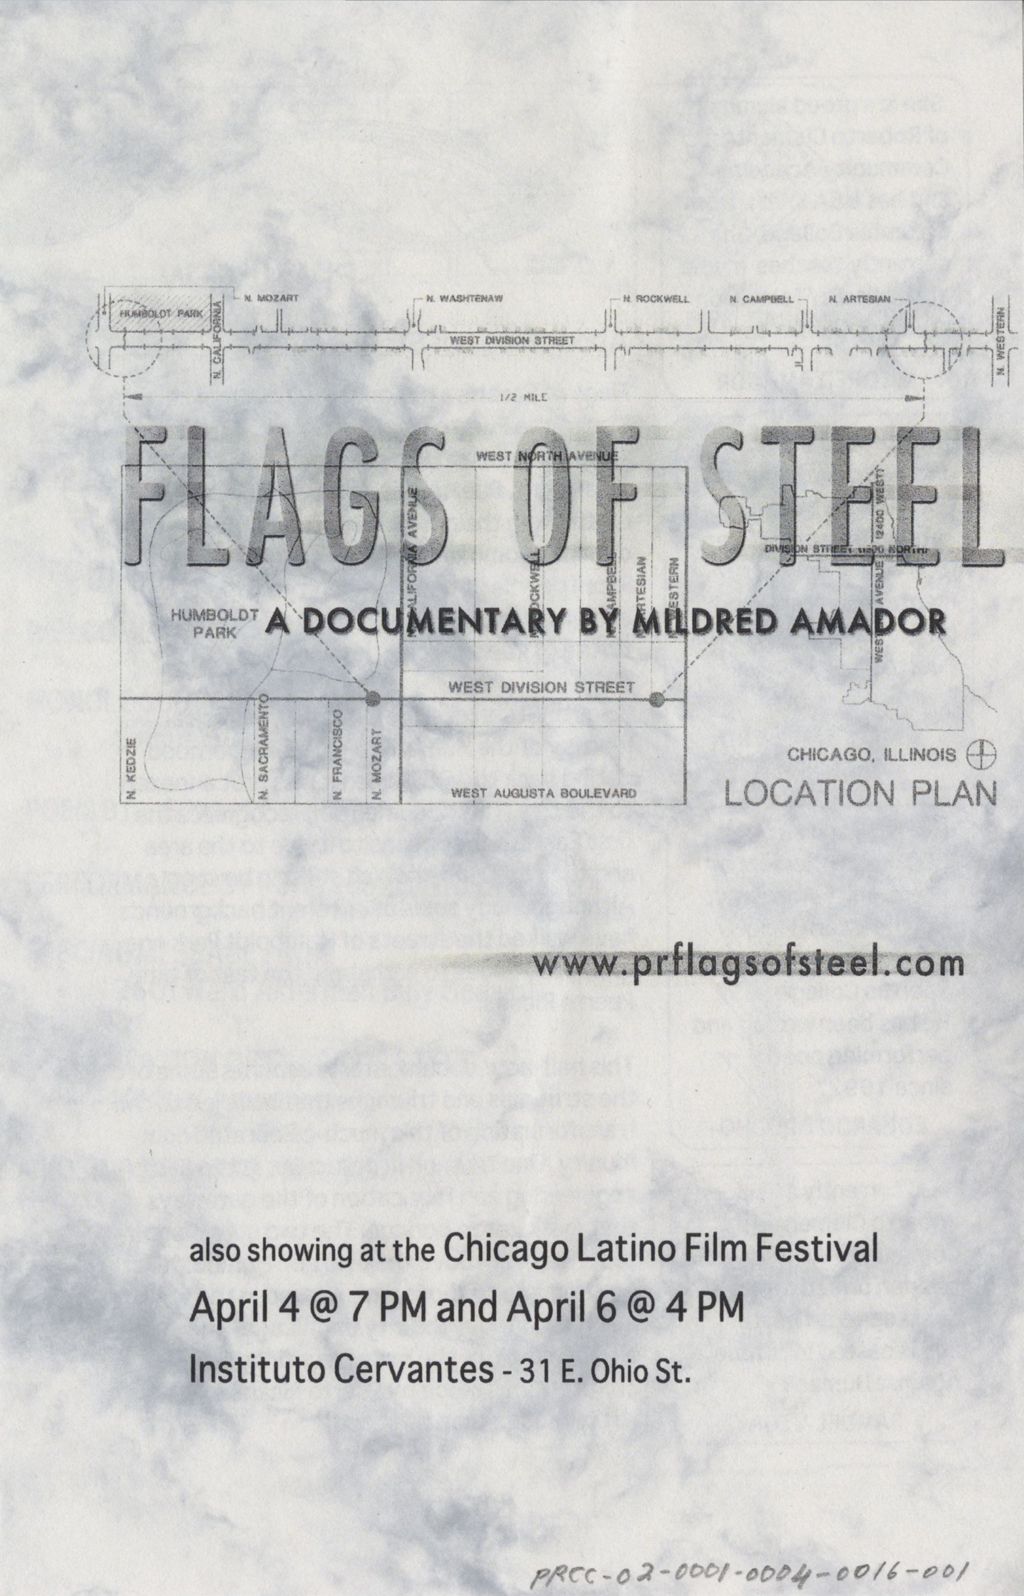 Miniature of Flags of Steel: A Documentary by Mildred Amador